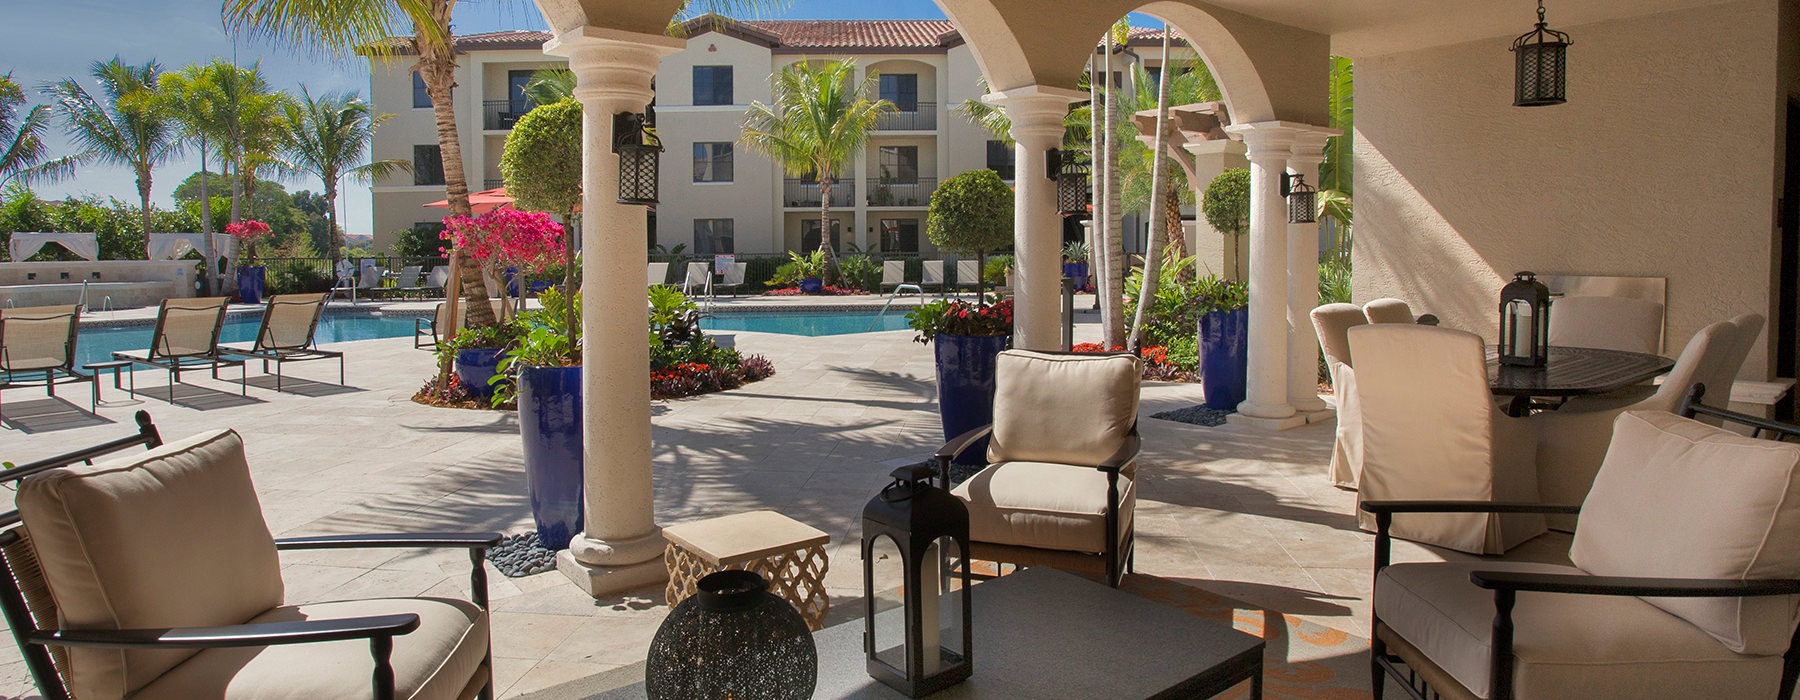 Poolside patio seating with plenty of chairs and tables